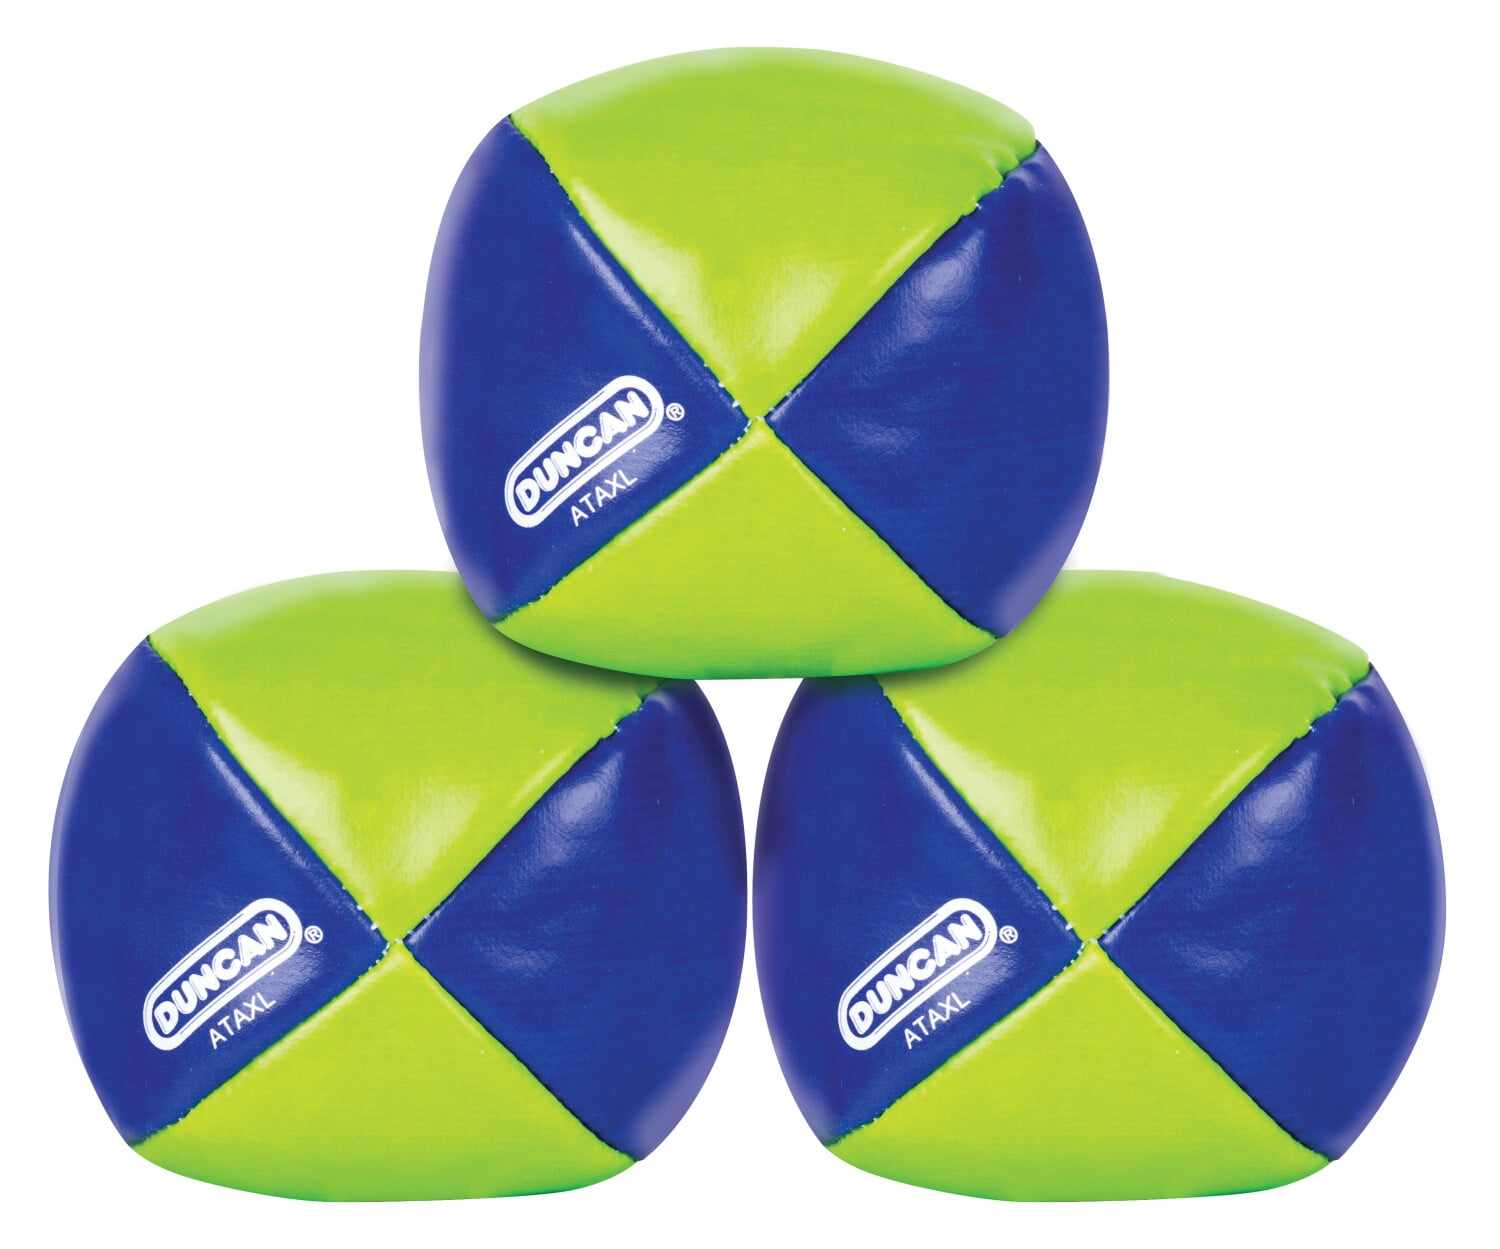 3 Small Traditional Juggling Balls Fun Summer Toy 